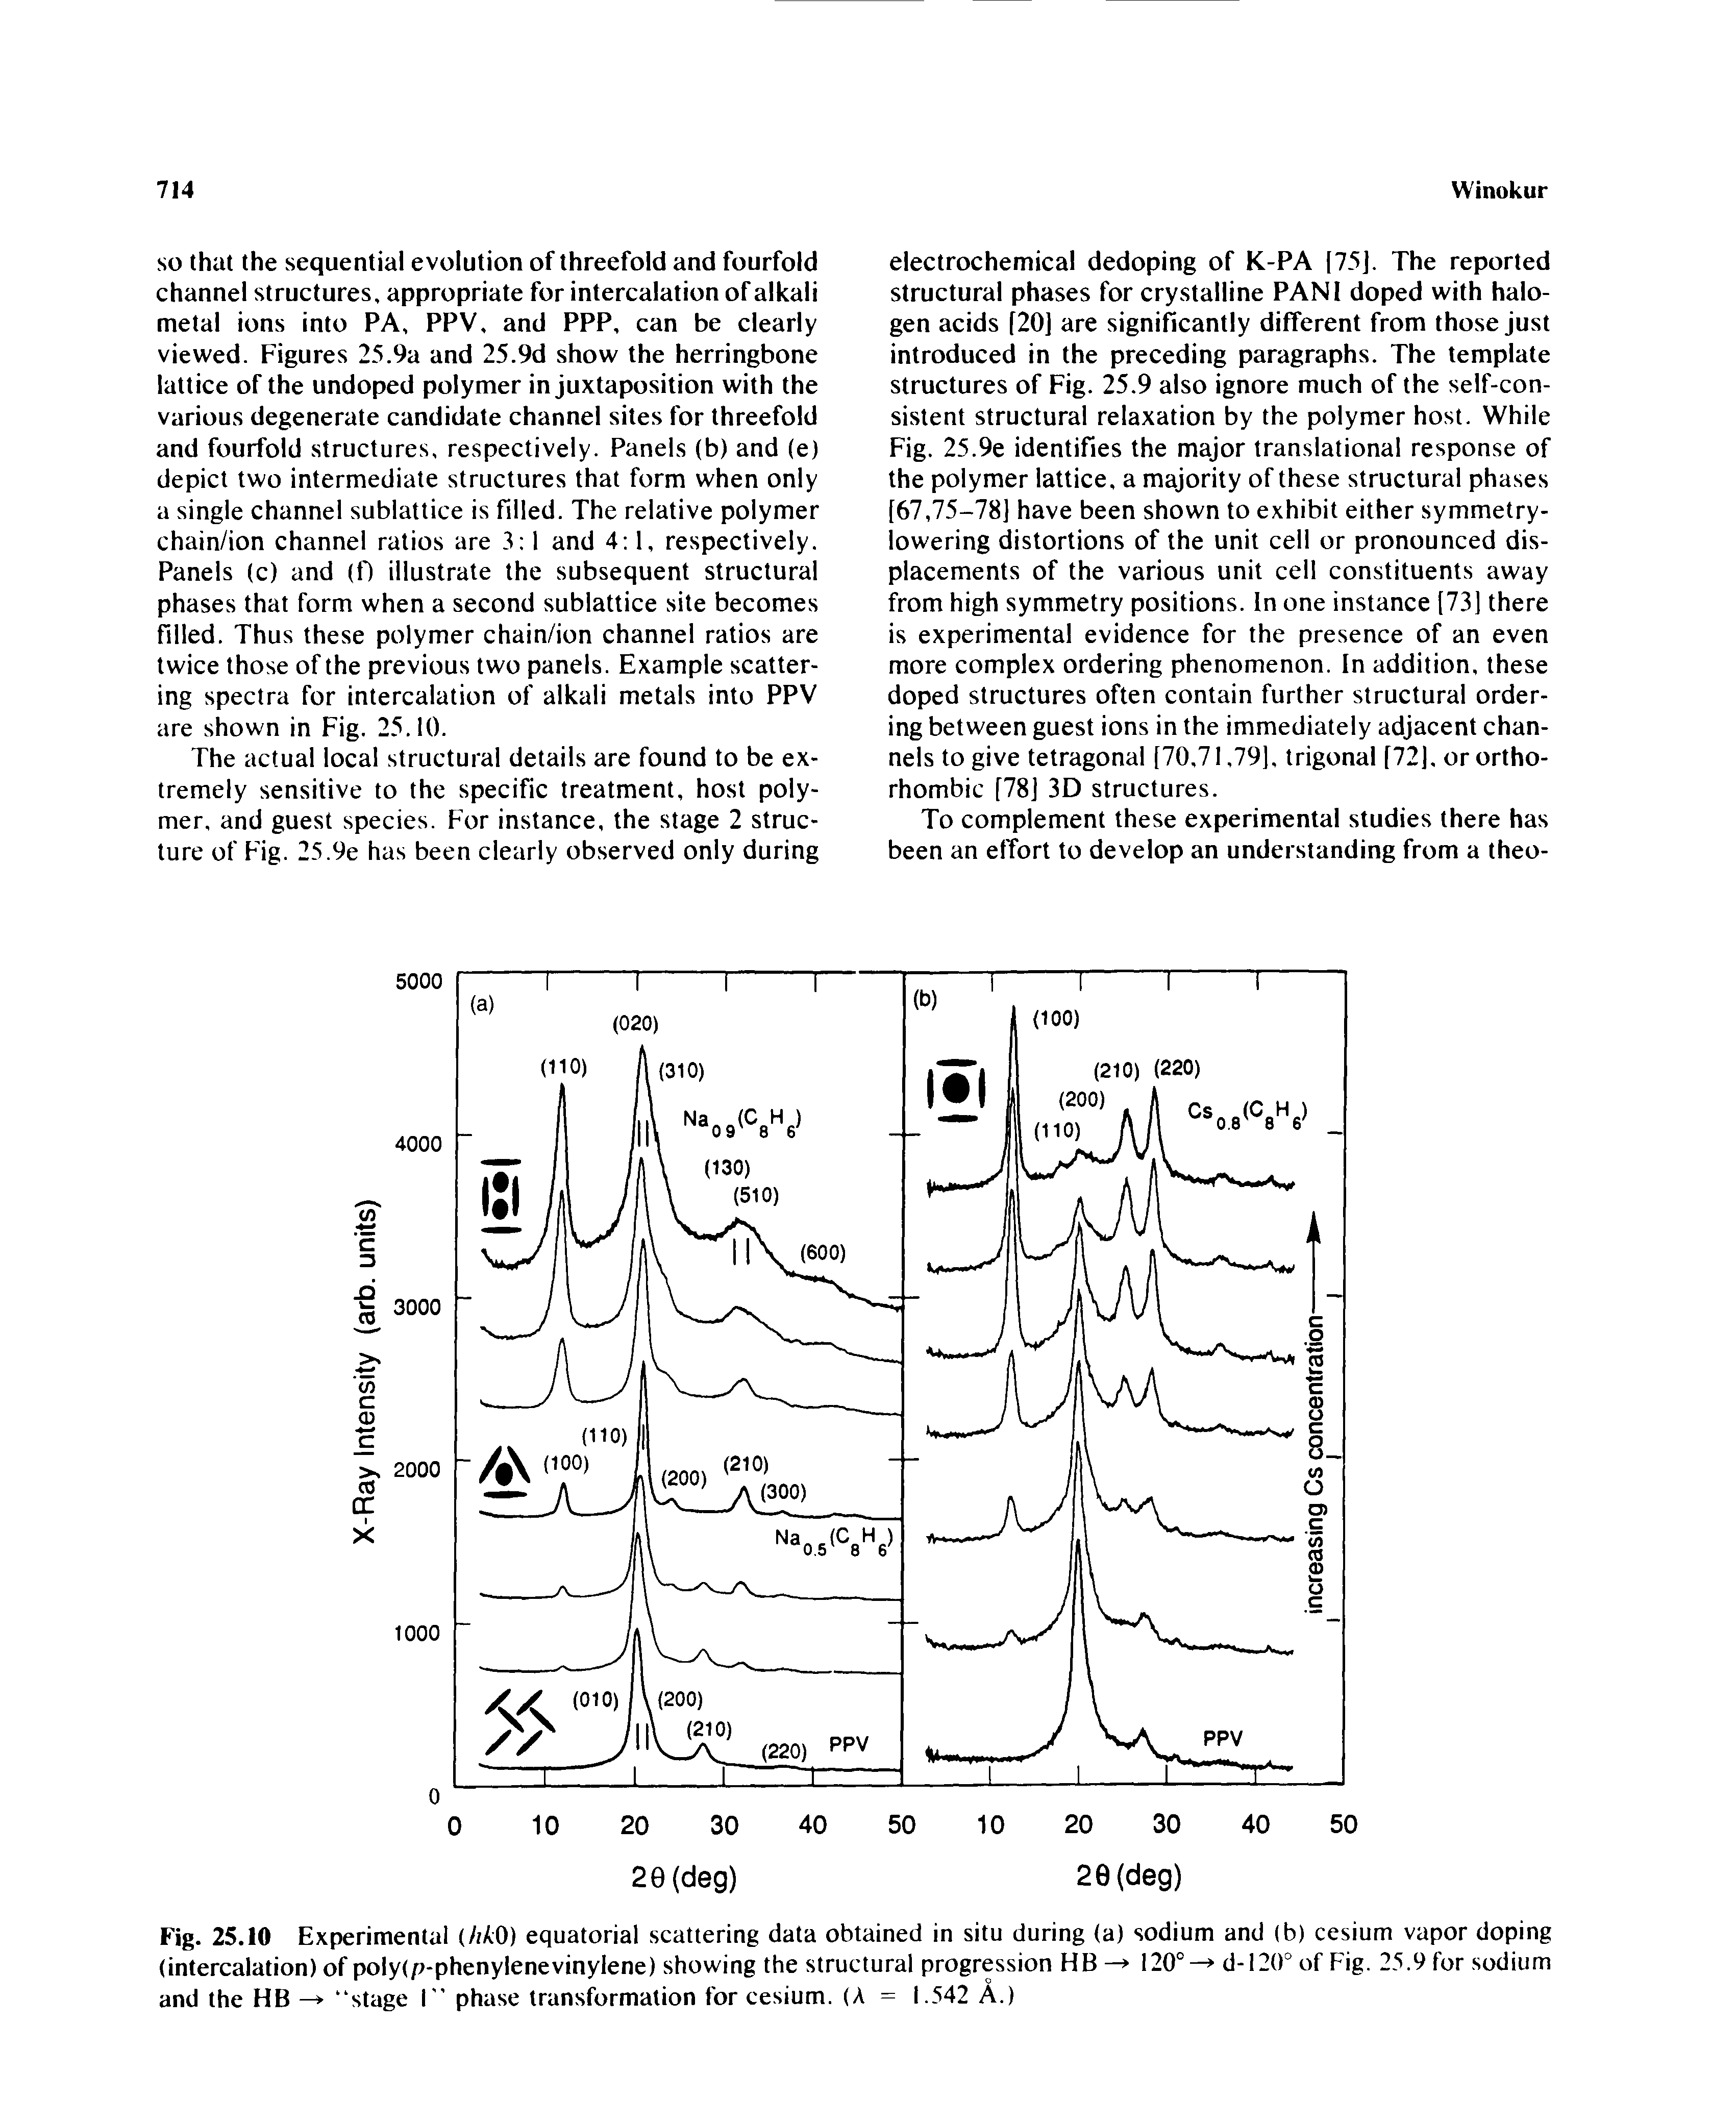 Fig. 25.10 Experimental (//A 0) equatorial scattering data obtained in situ during (a) sodium and (b) cesium vapor doping (intercalation) of poly(p-phenylenevinylene) showing the structural progression HB 120° d-12()° of Fig. 25.9 for sodium and the HB stage 1 phase transformation for cesium. (A = 1.542 A.)...